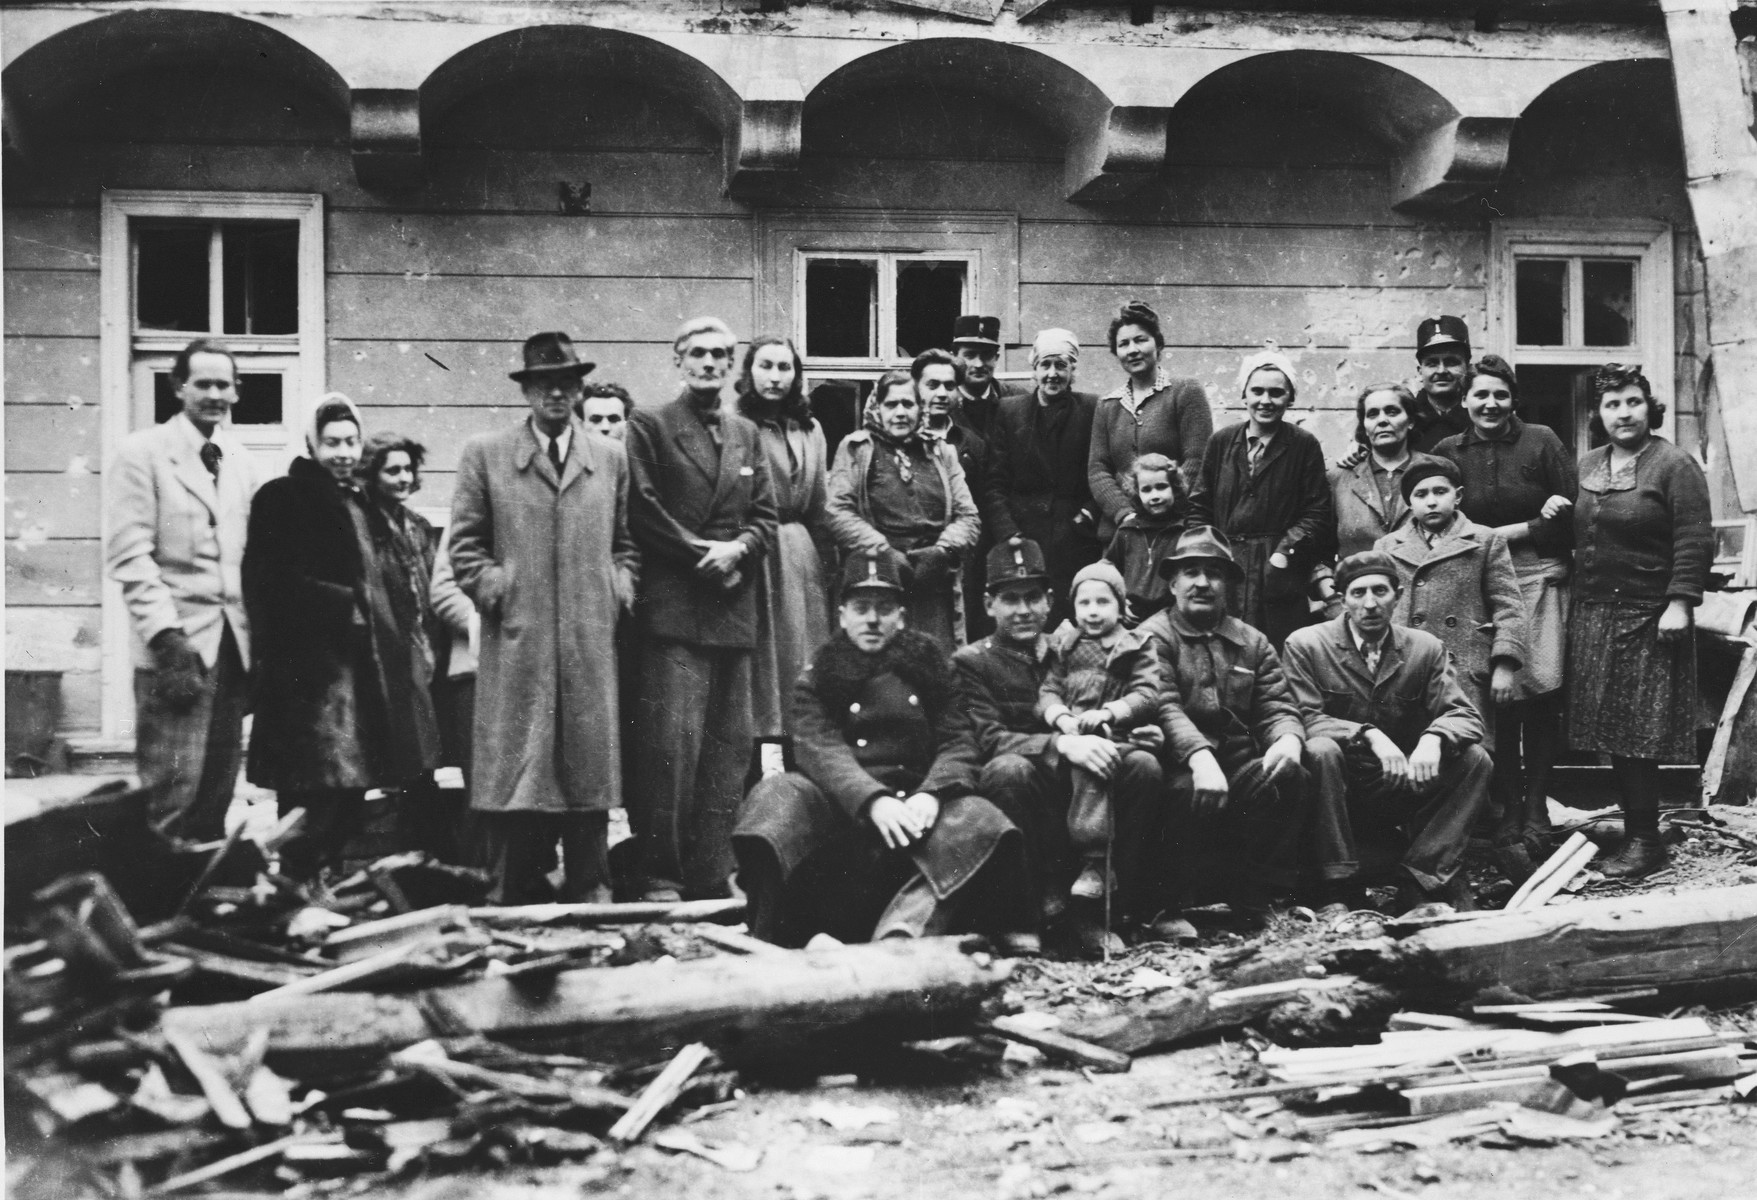 Charles (Carl) and Gertrud Lutz pose with police and former employees among the ruins of the British legation in Budapest after the liberation.

Among those pictured is Carl Lutz, his first wife, Gertrud, his future wife, Magda, and his future step-daughter, Agnes.